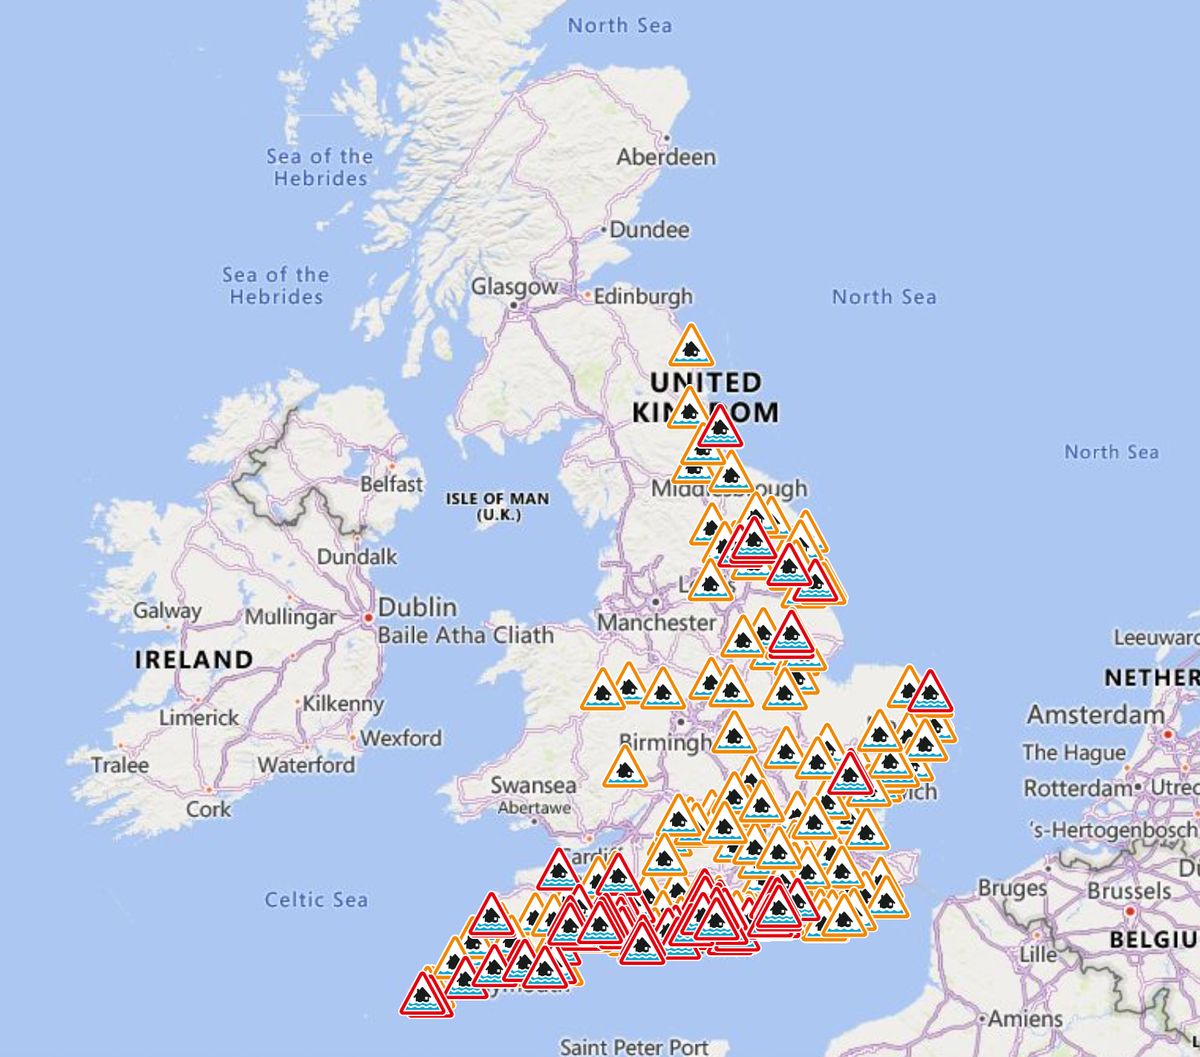 Over 200 flood warnings and alerts have been issued across the UK (Gov.uk)